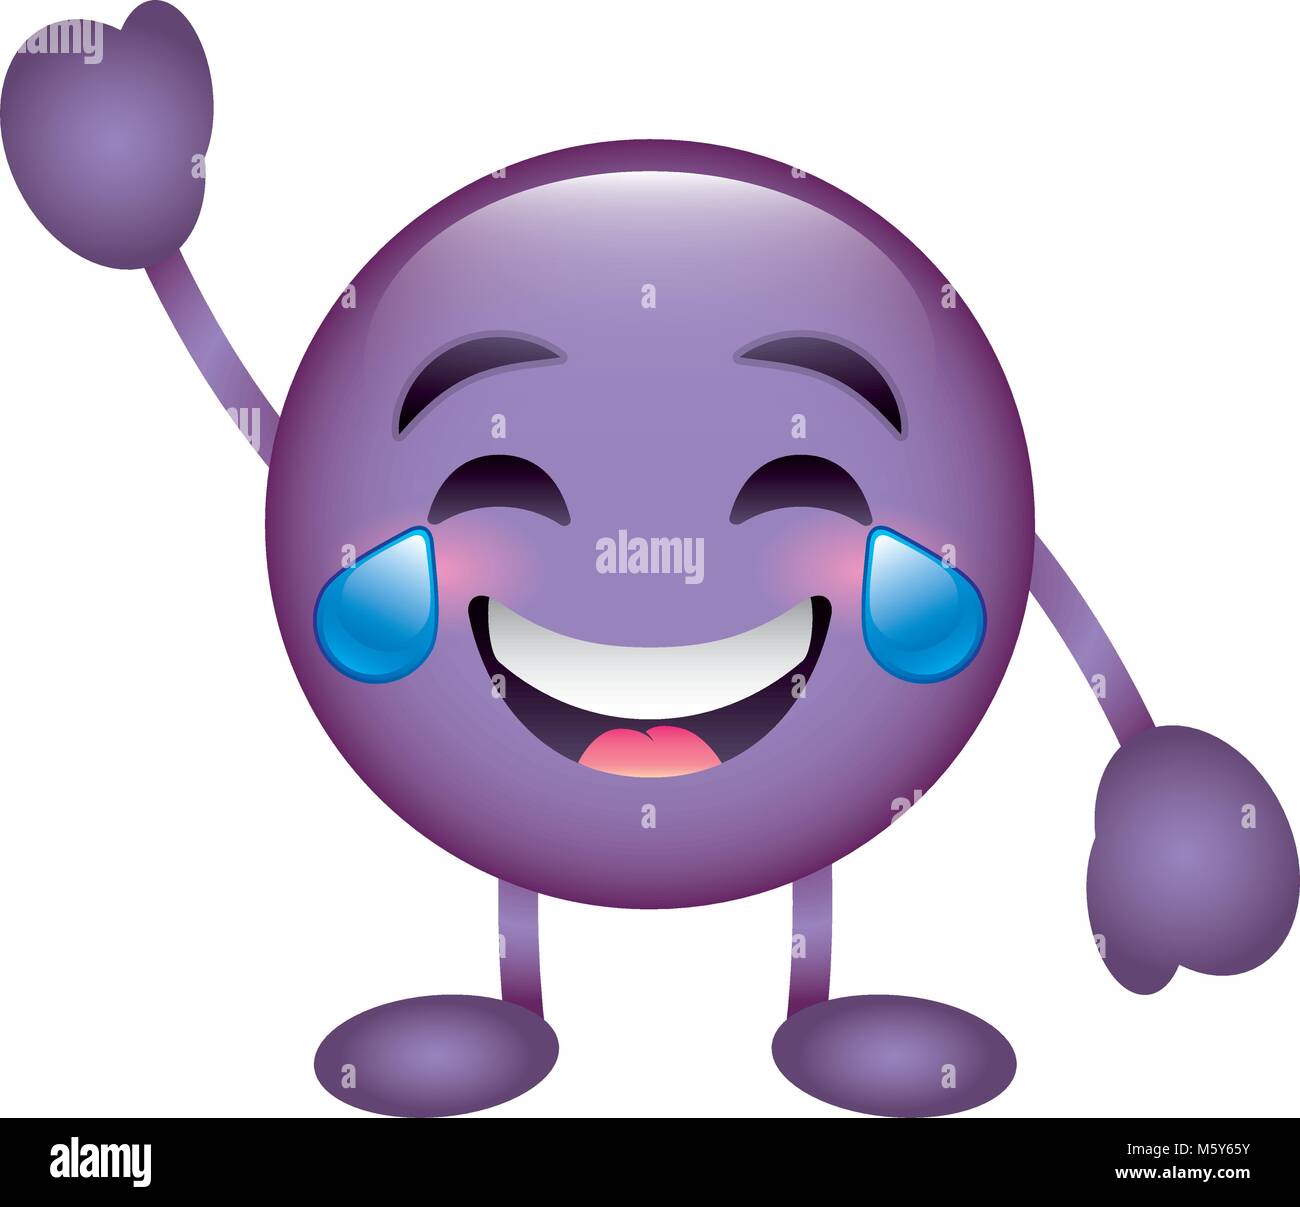 purple emoticon cartoon face smiling with tears character Stock Vector